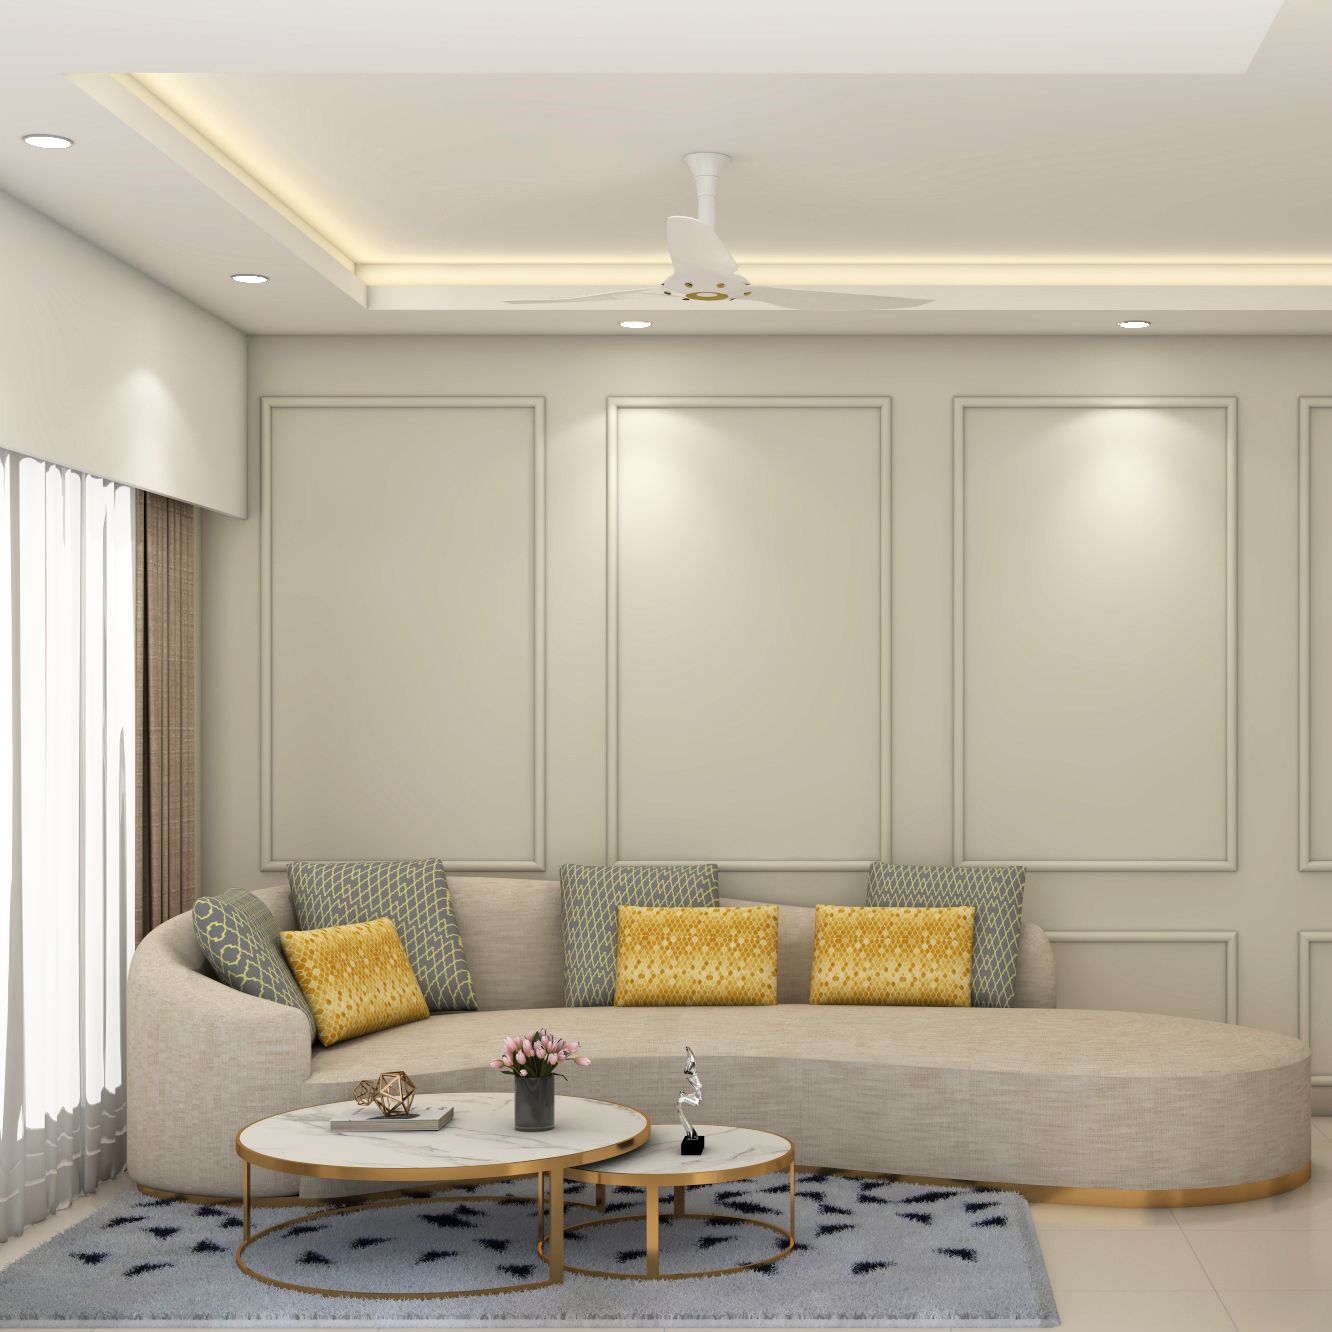 Modern Living Room Design With An Upholsterd Sofa With Yellow Cushions